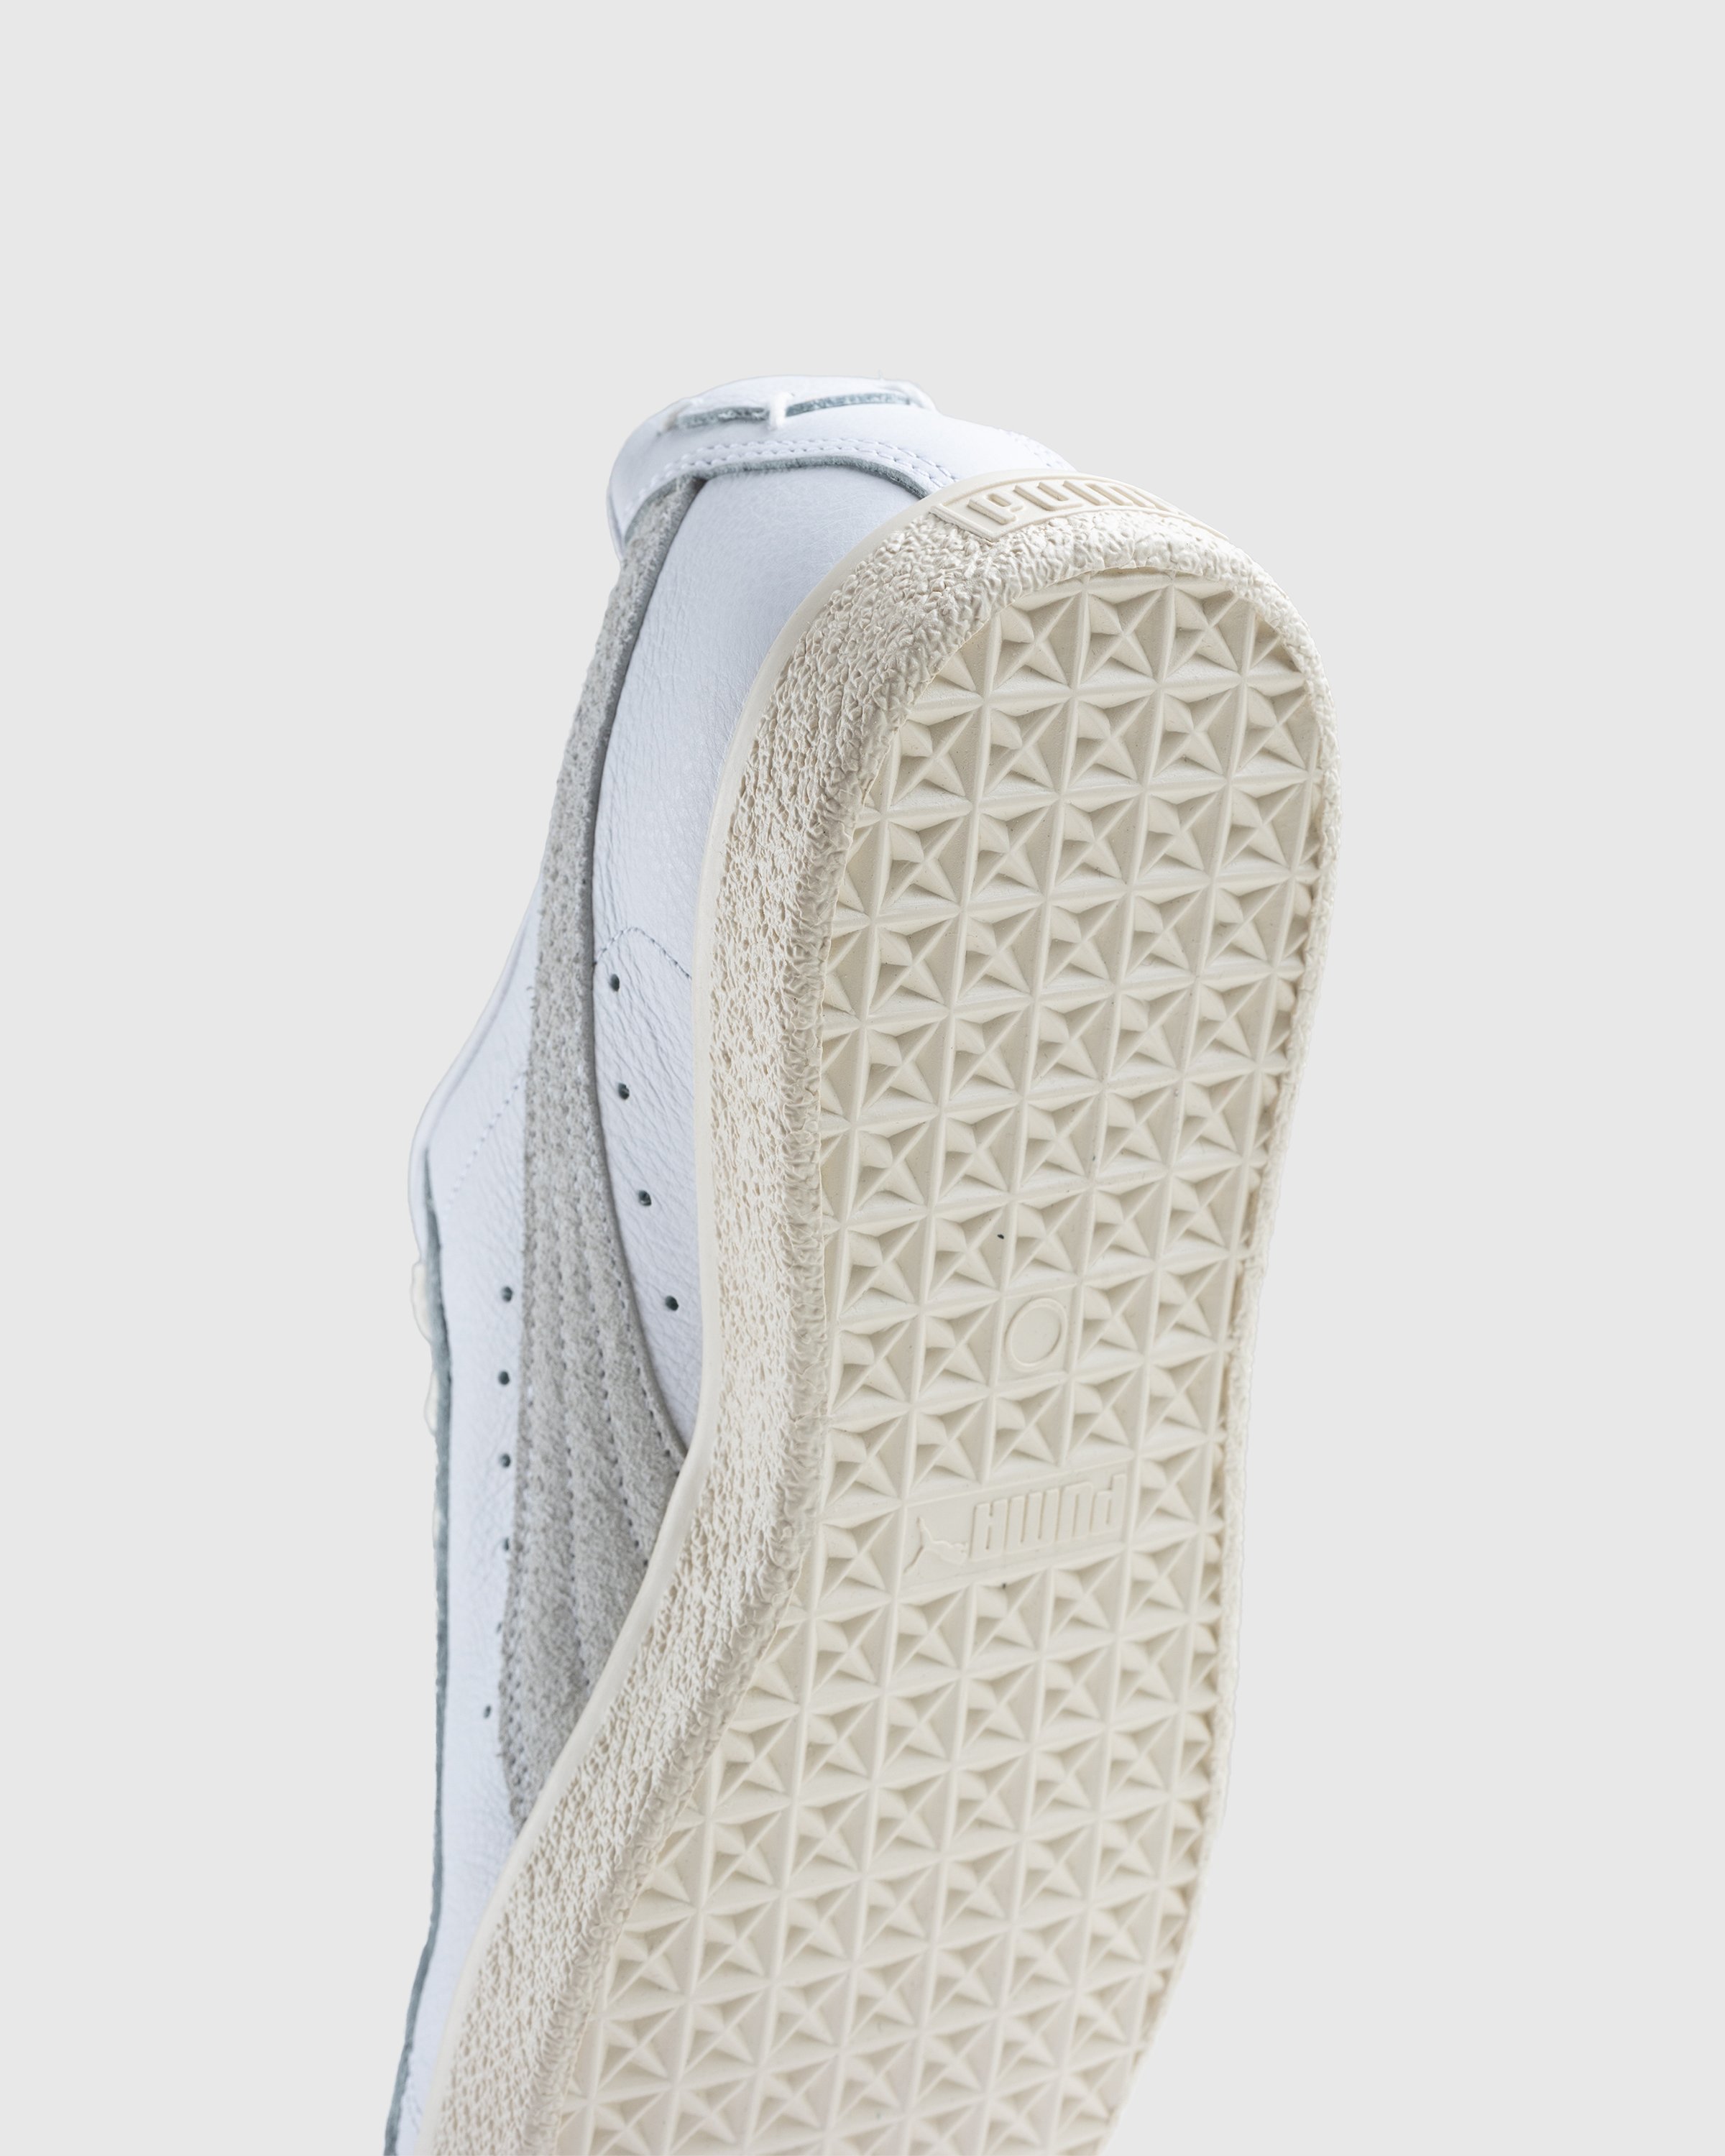 Puma - Clyde Base White - Footwear - White - Image 6